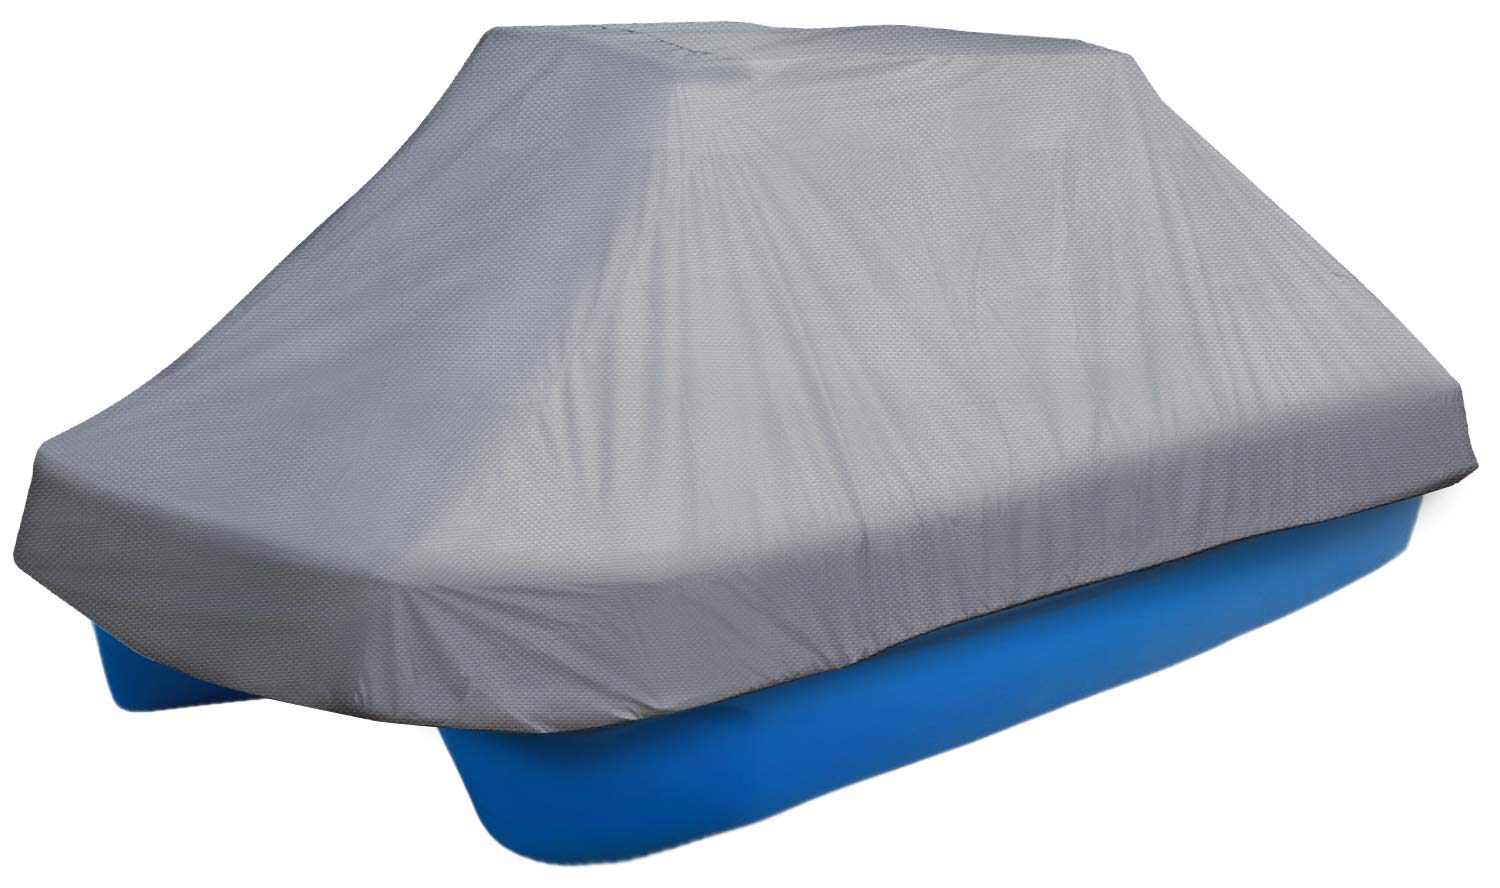  Leader Accessories Molded Pond Boat Cover Fits 8'-10'L Pond or  Bass Boats (300D Grey) : Sports & Outdoors